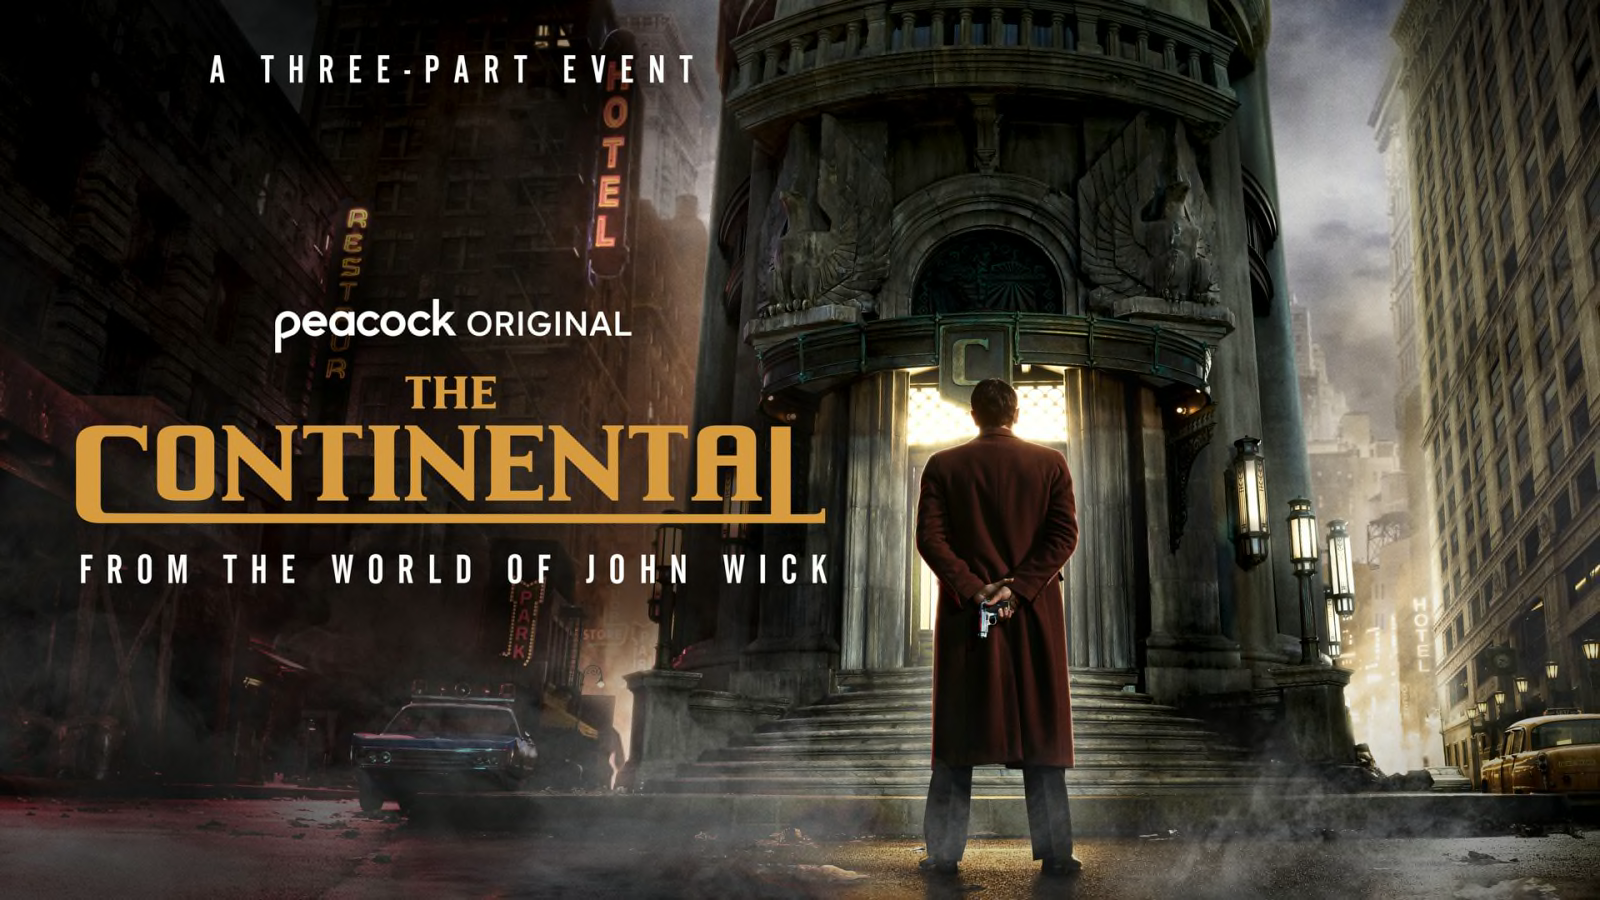 The Continental: From the World of John Wick Episode 2 Recap